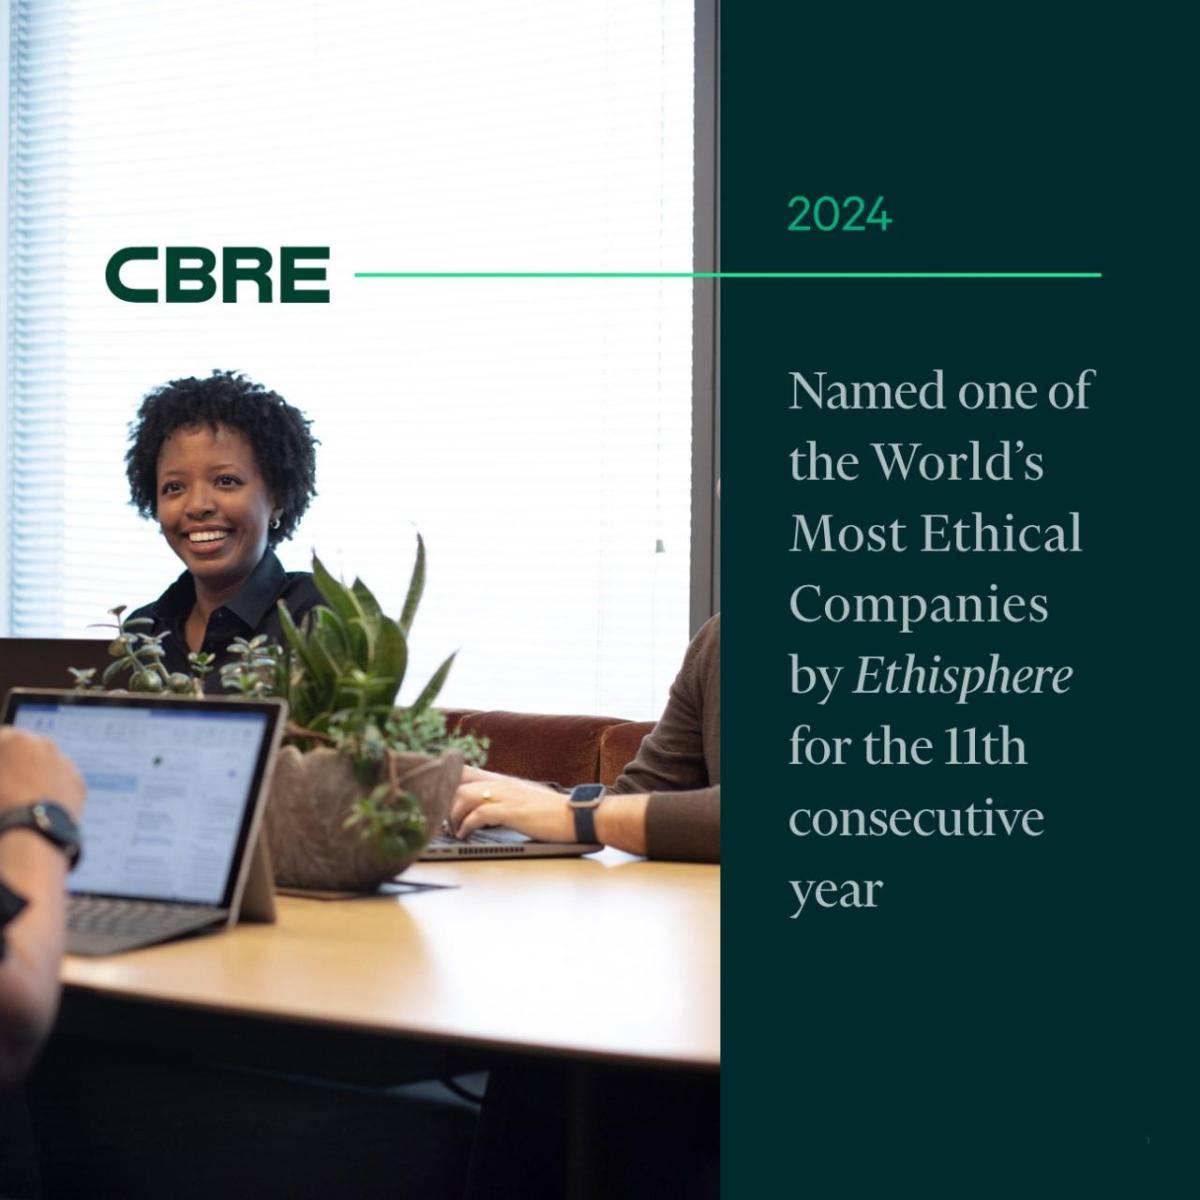 CBRE Named as one of the 2024 World’s Most Ethical Companies by Ethisphere for 11th Consecutive Year